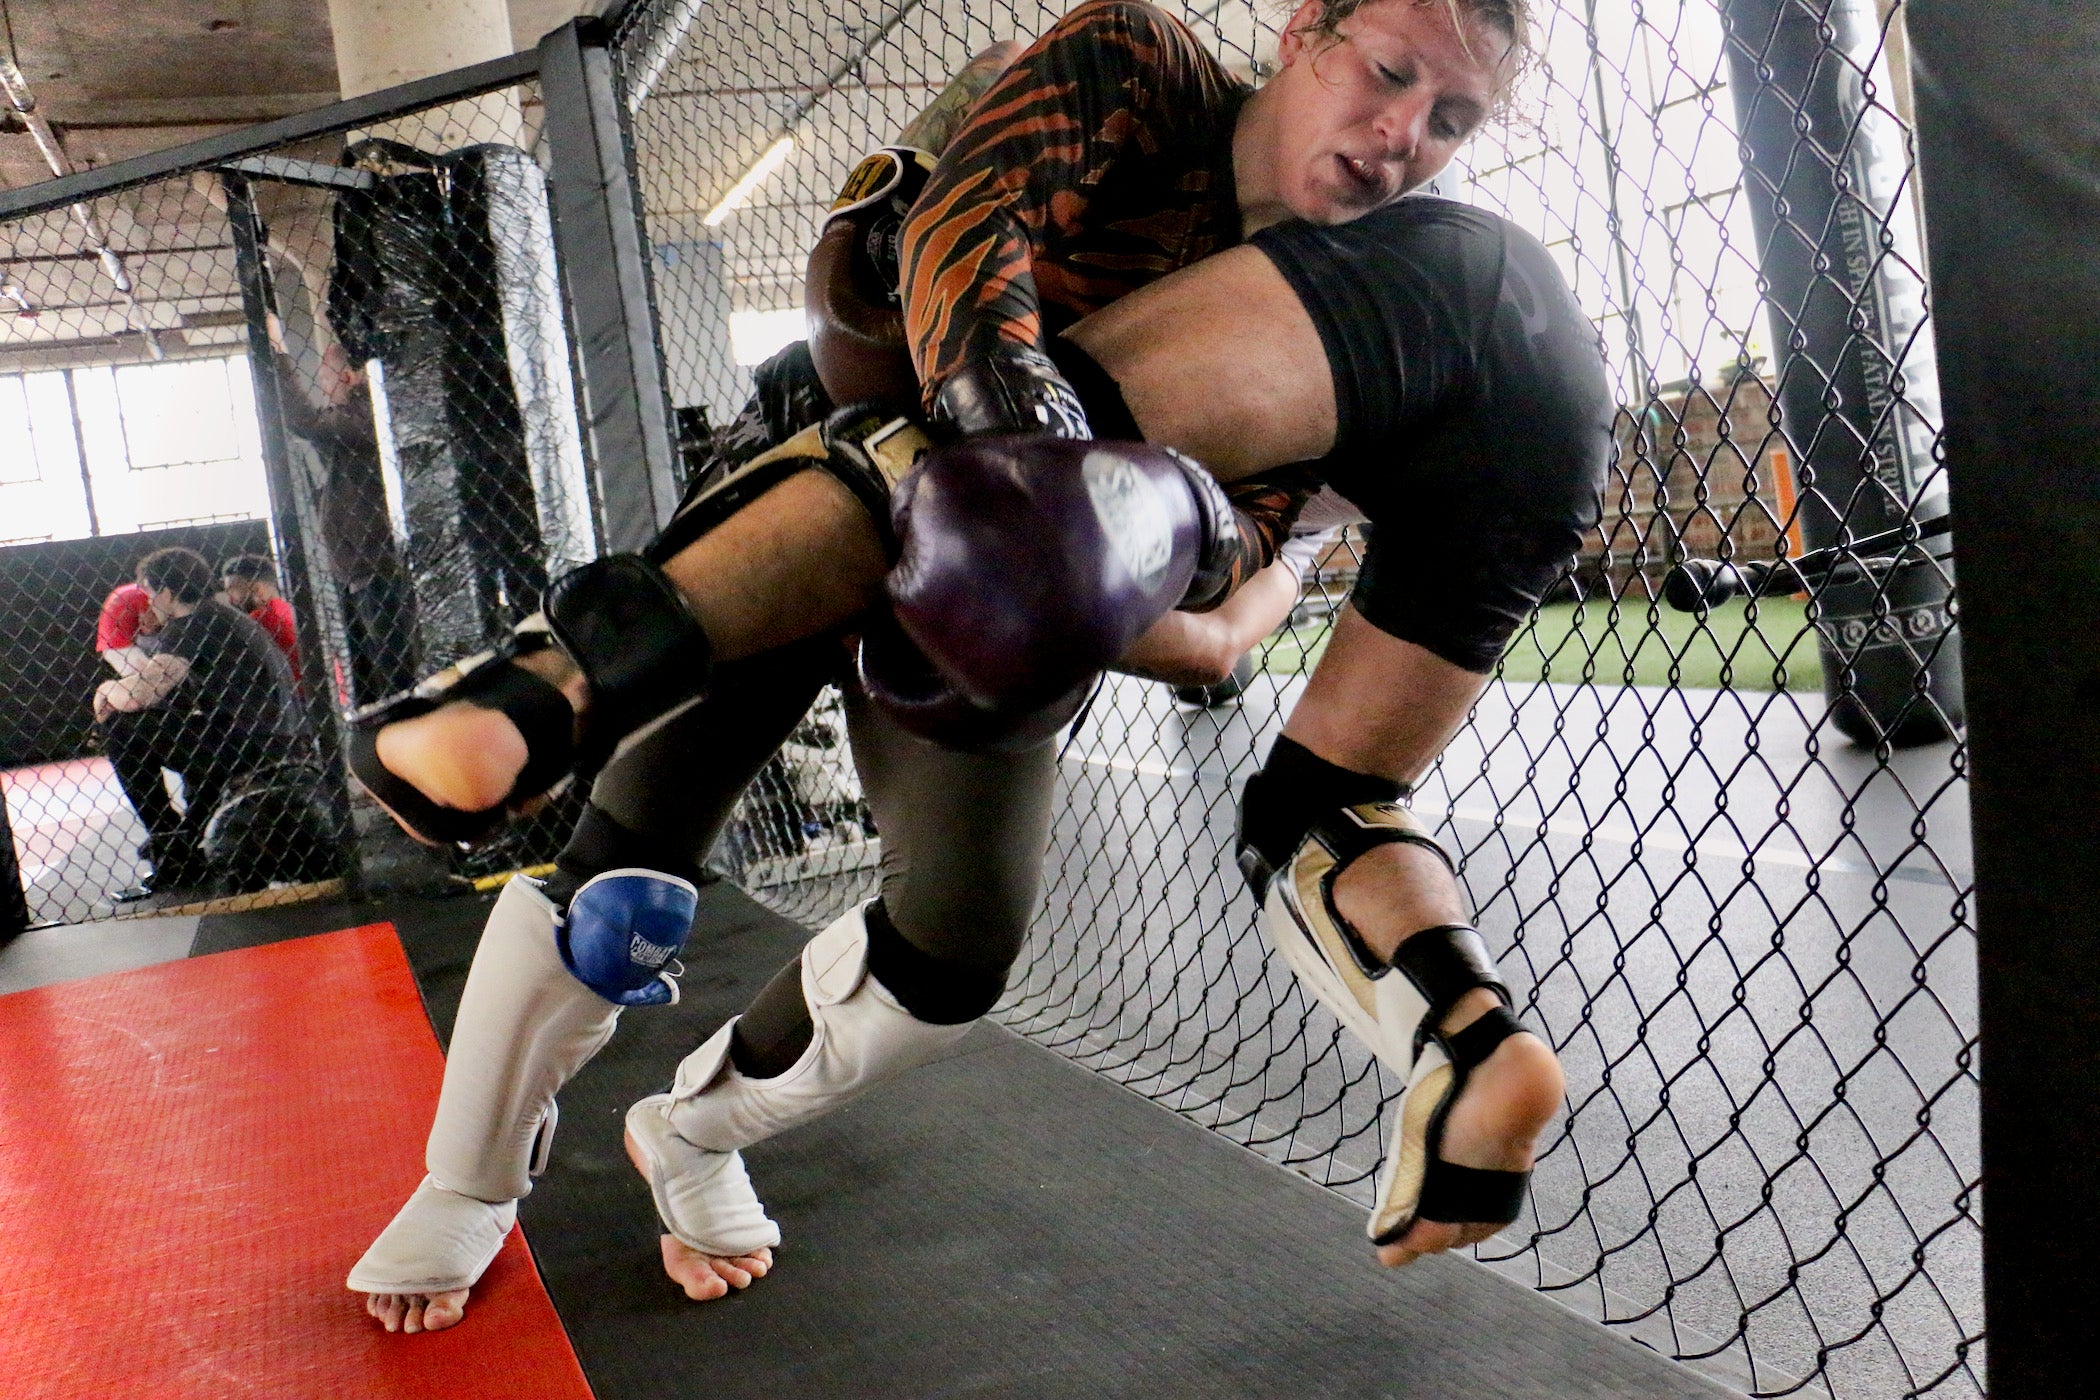 MMA fighter training in Philly inspires city artists ahead of